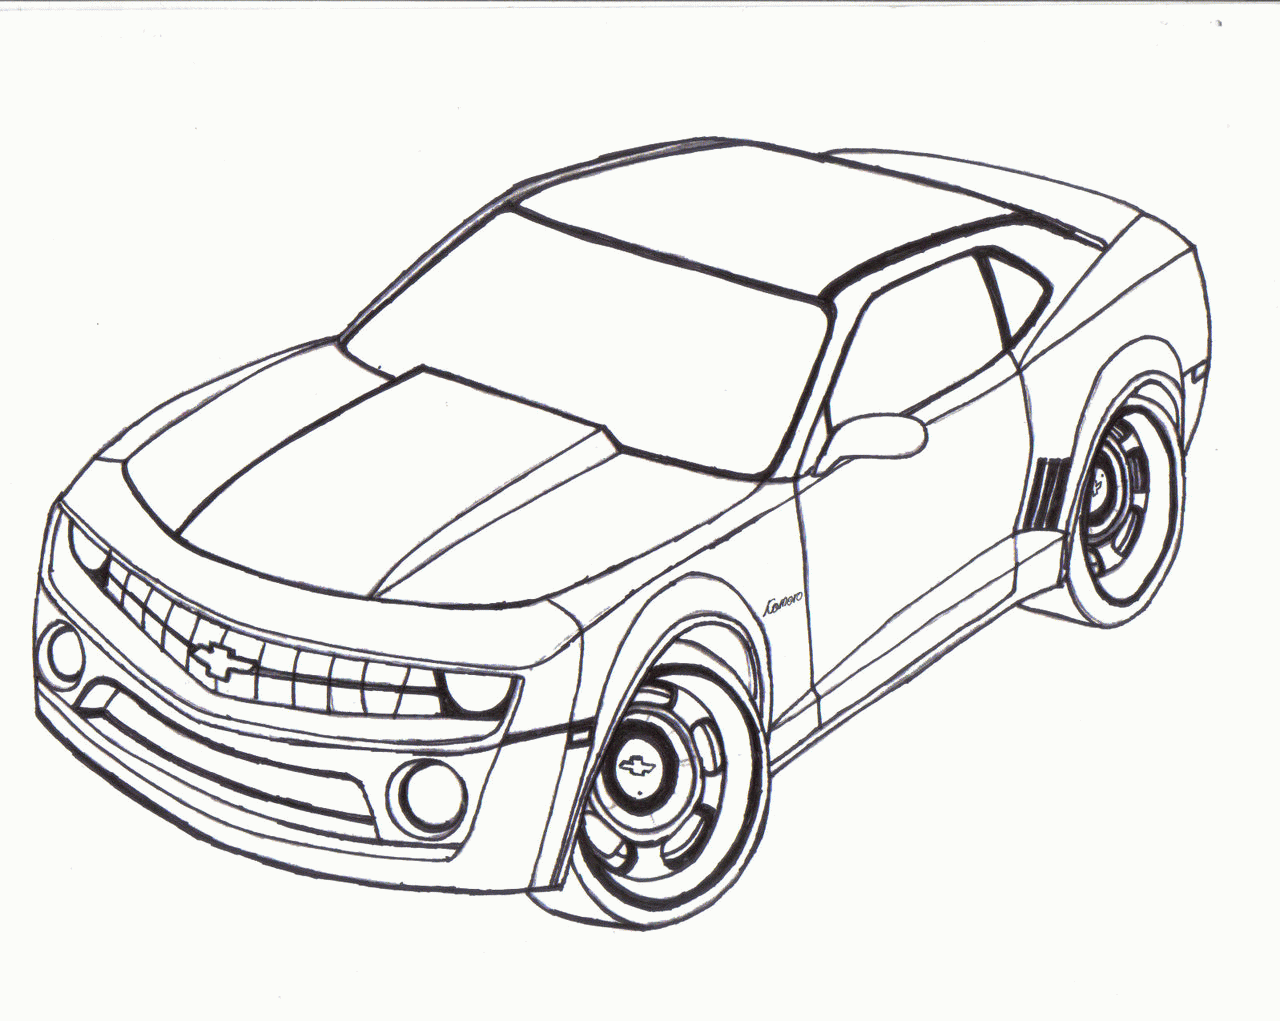 Chevrolet Camaro Cars Coloring Pages Coloring Pages For Kids #Kb ...